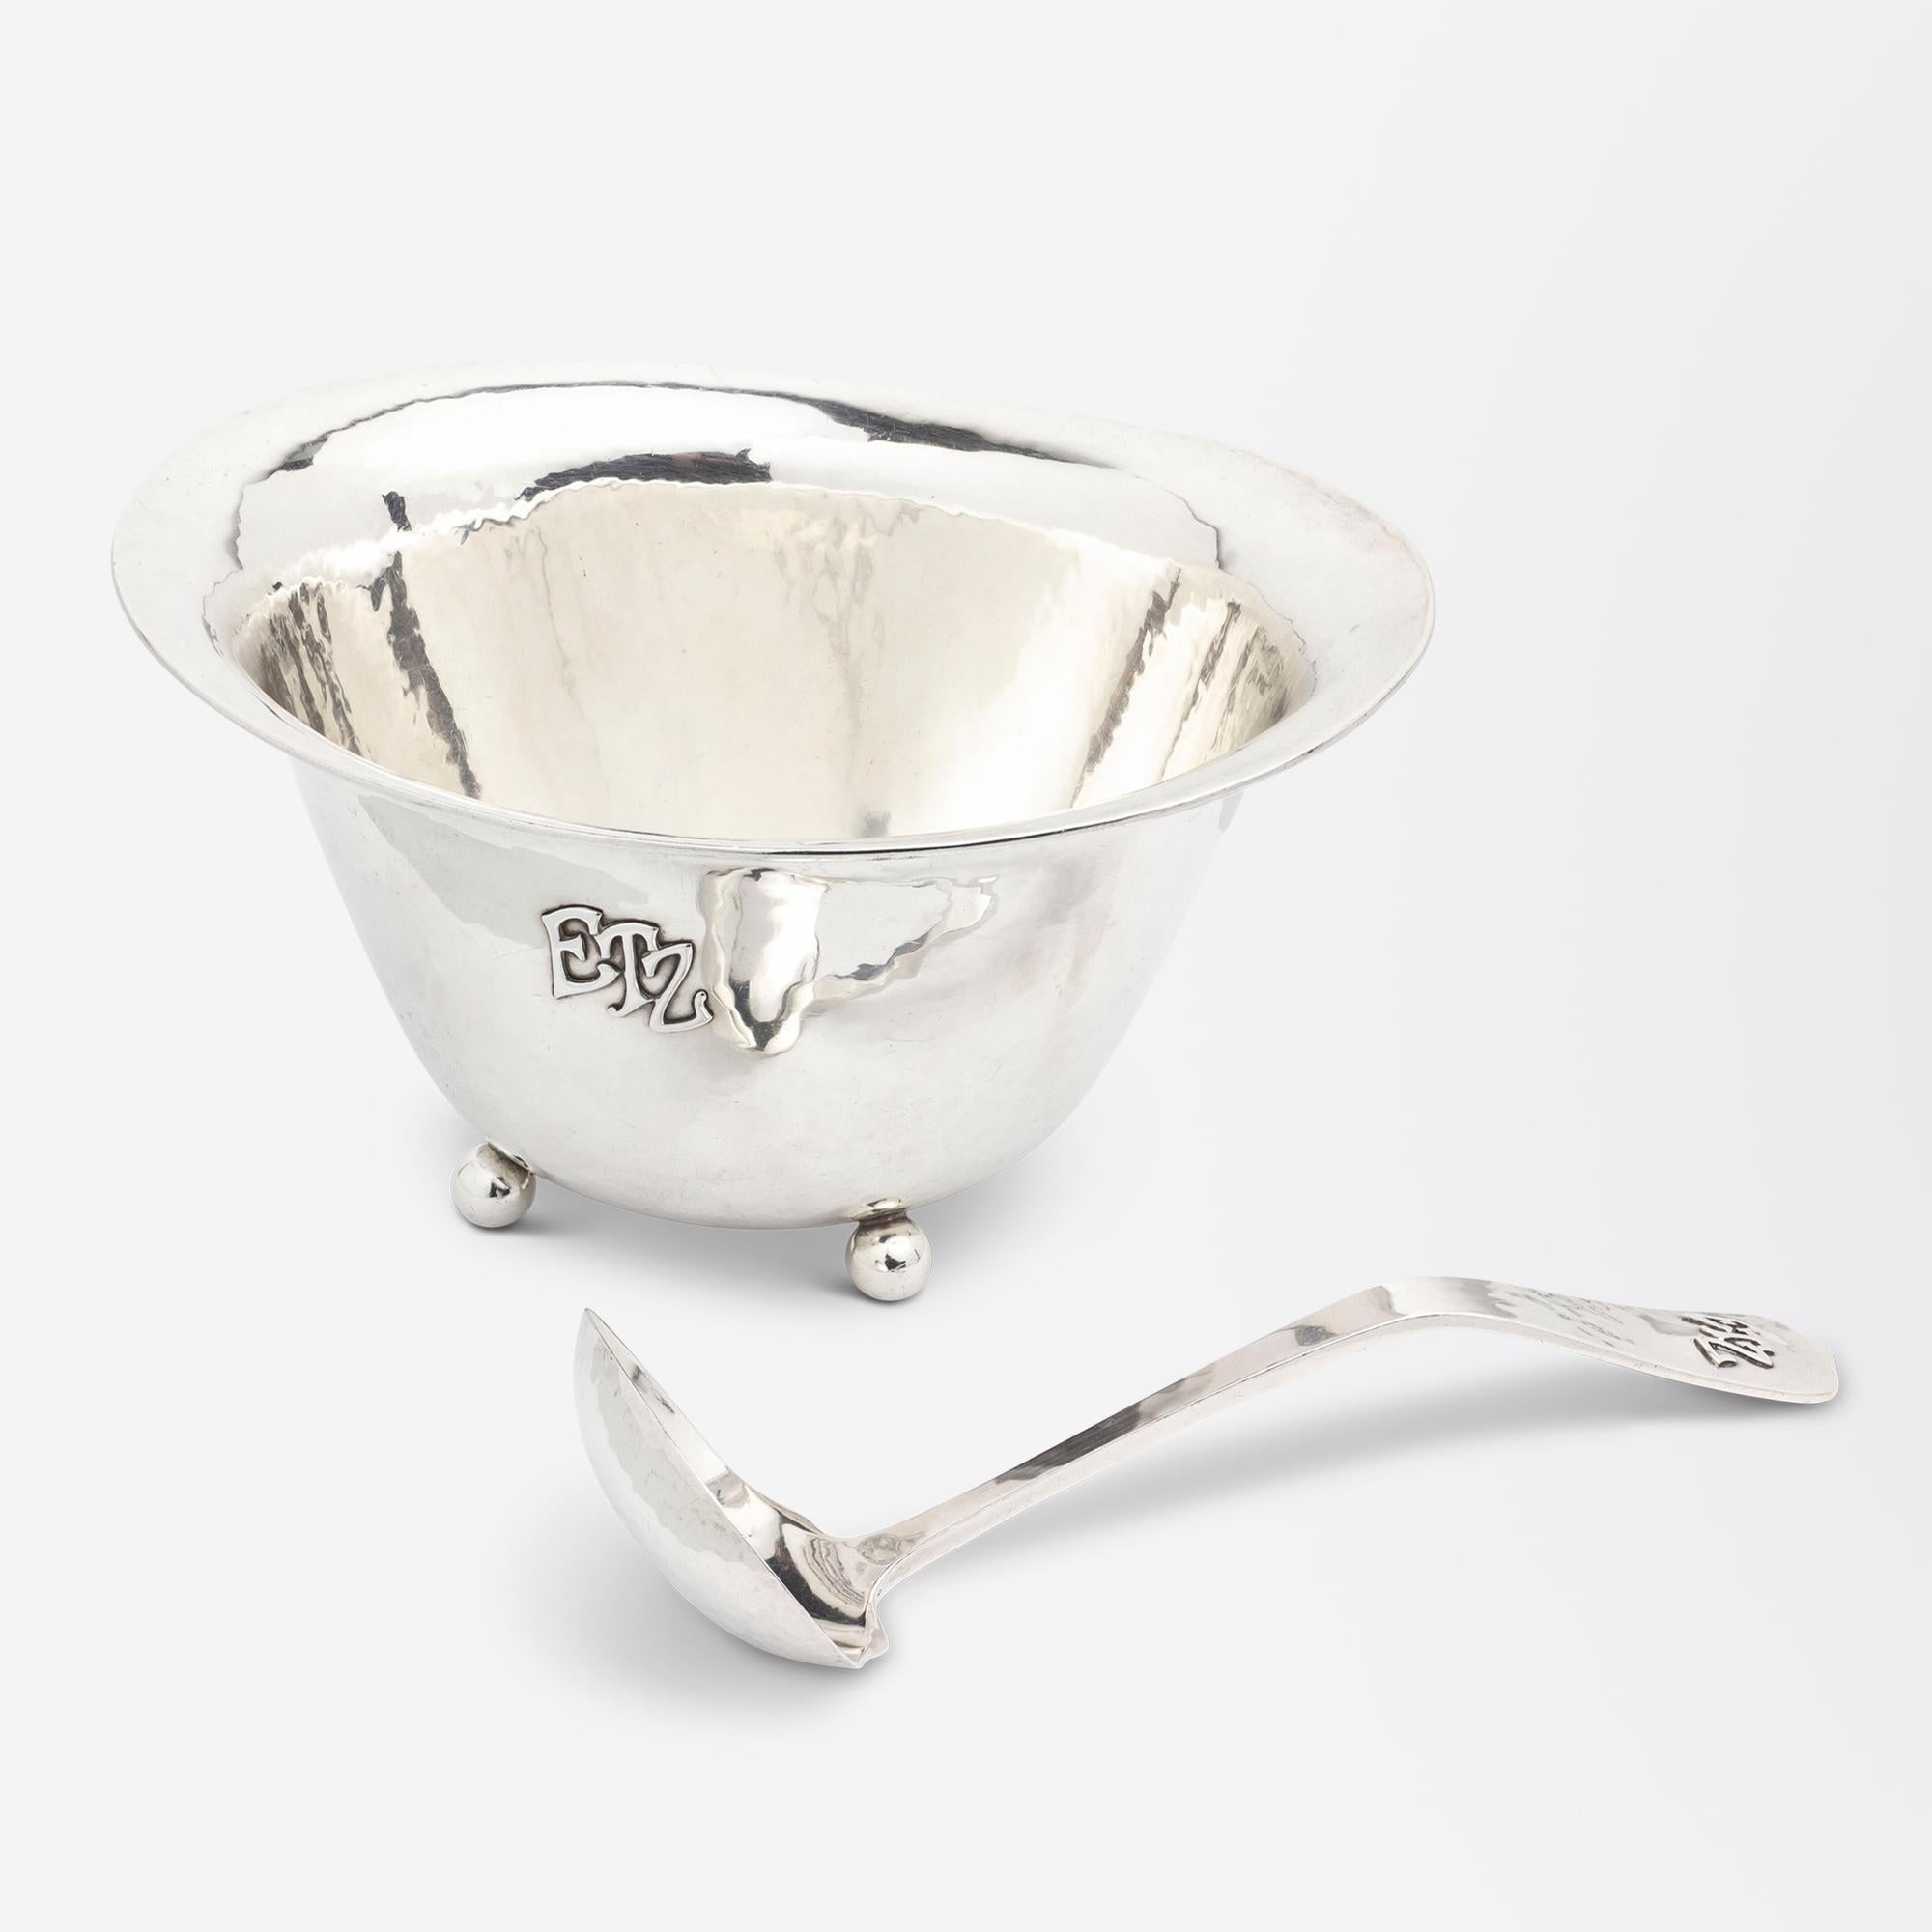 There is something very charming about this footed oval bowl and matched sterling serving spoon by Lebolt and Company. The two pieces are hand wrought from sterling silver with the bowl sitting atop of four small silver spheres, while the spoon is